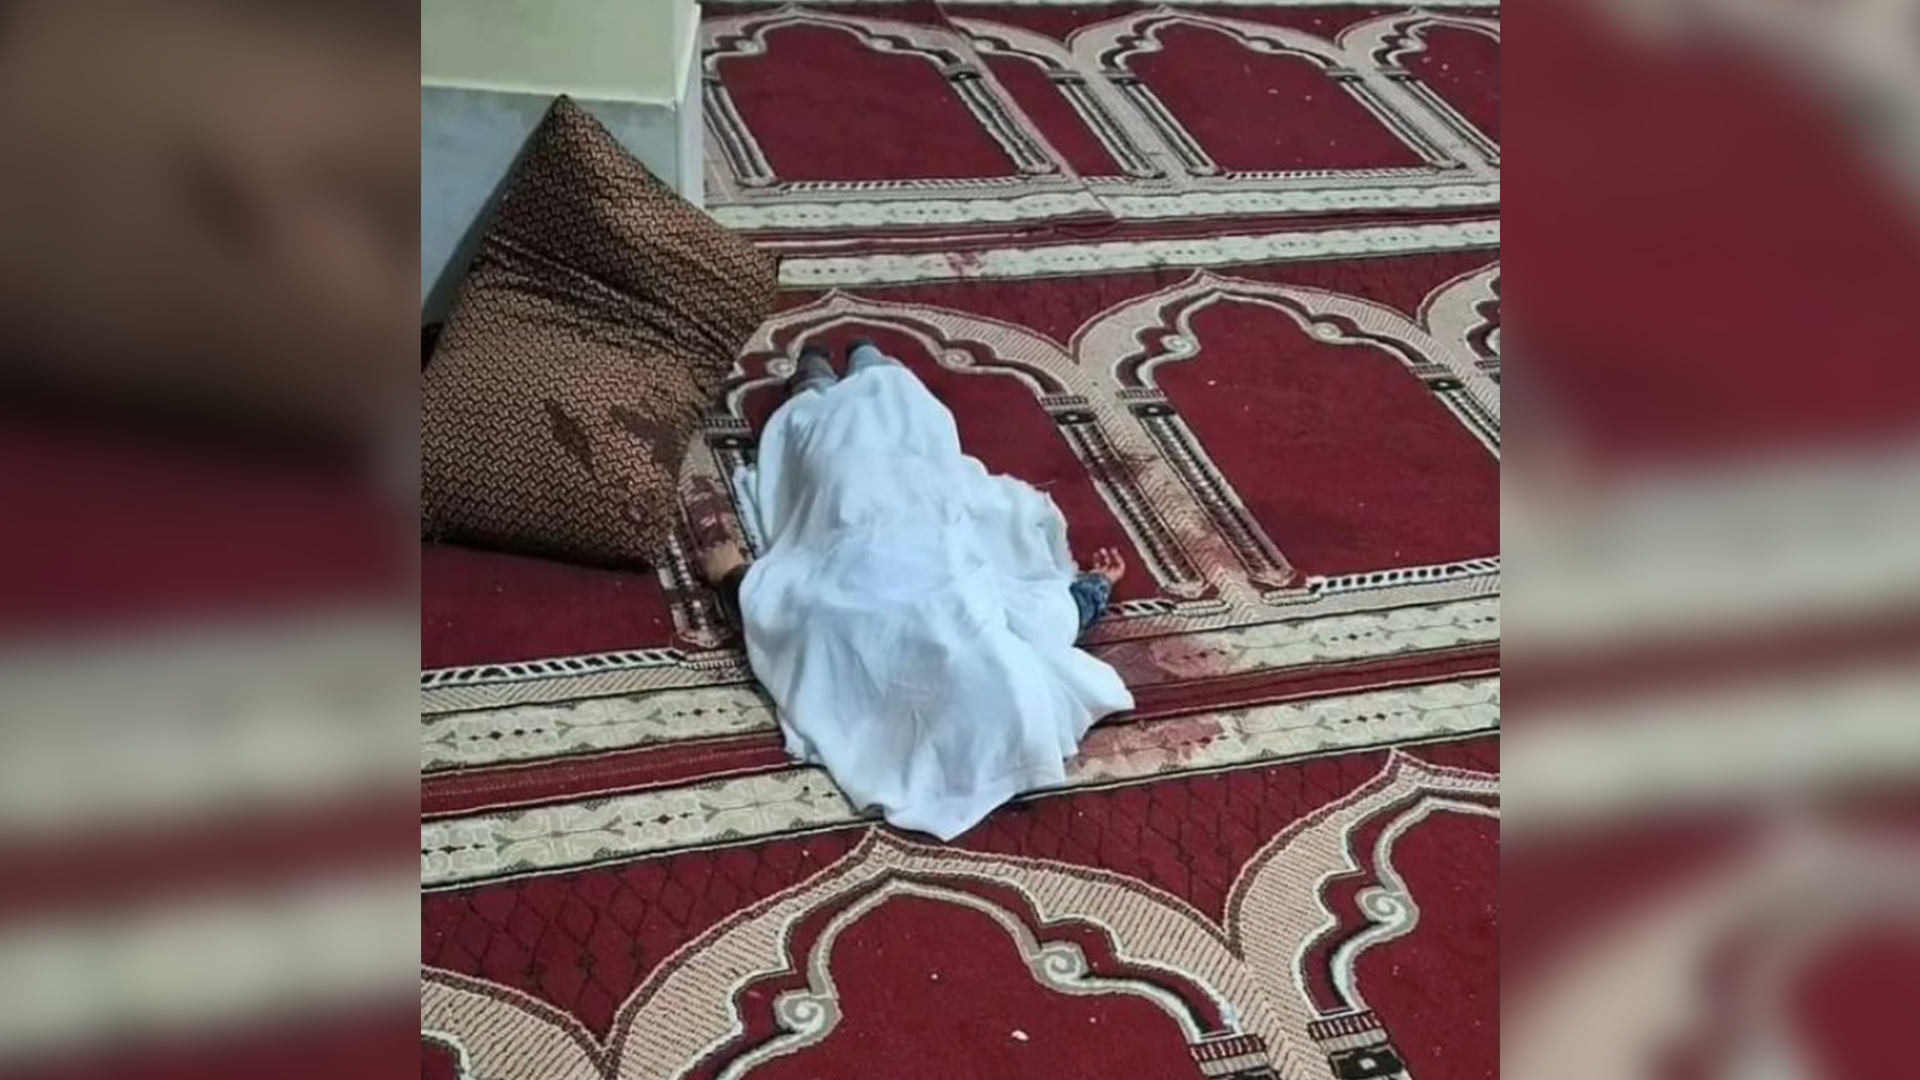 A three-year-old child has been shot by armed men in the mosque.